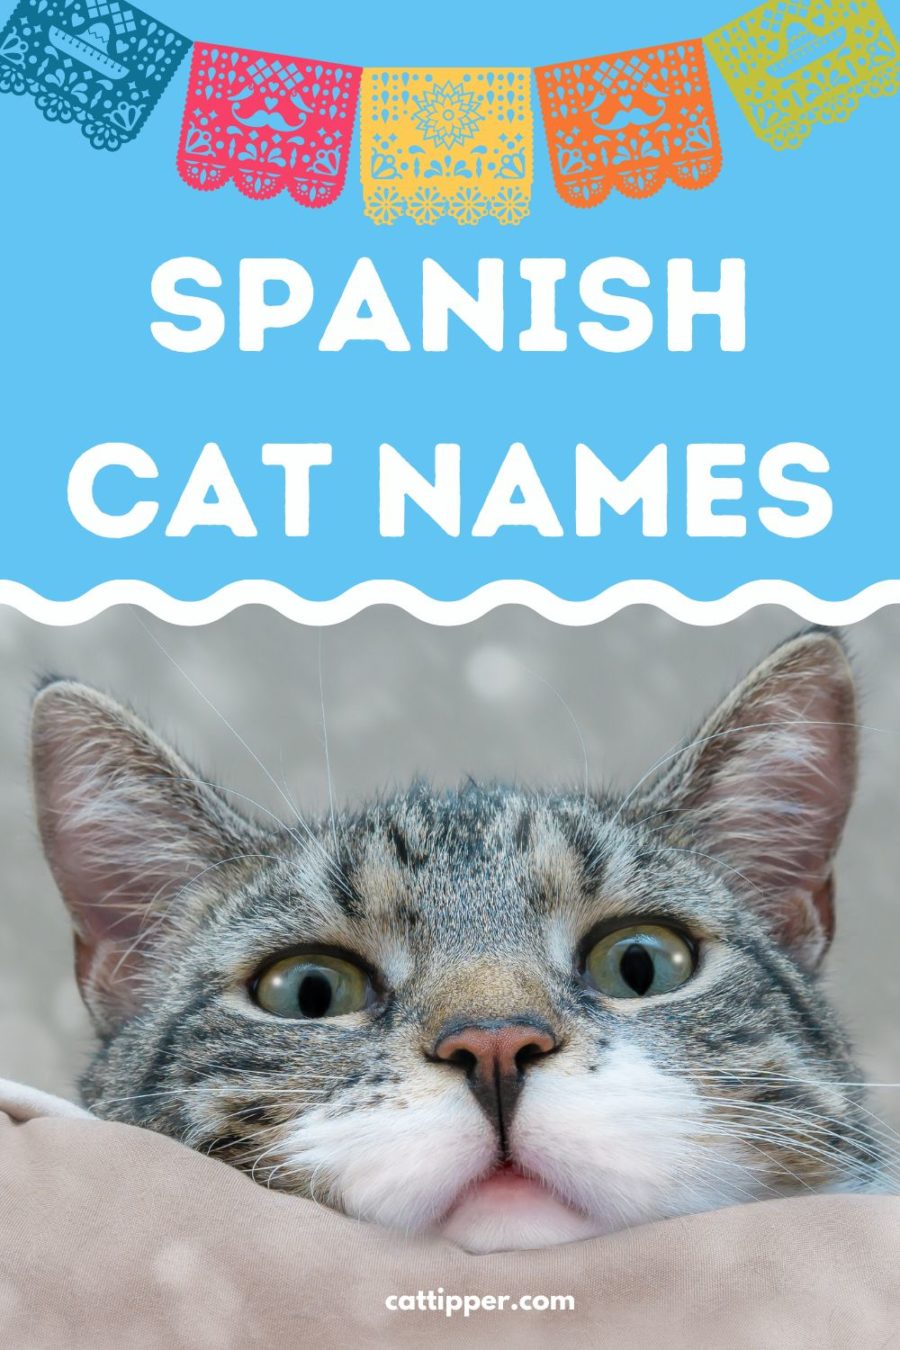 Spanish Cat Names: Purr-fecto names for your new cat or kitten